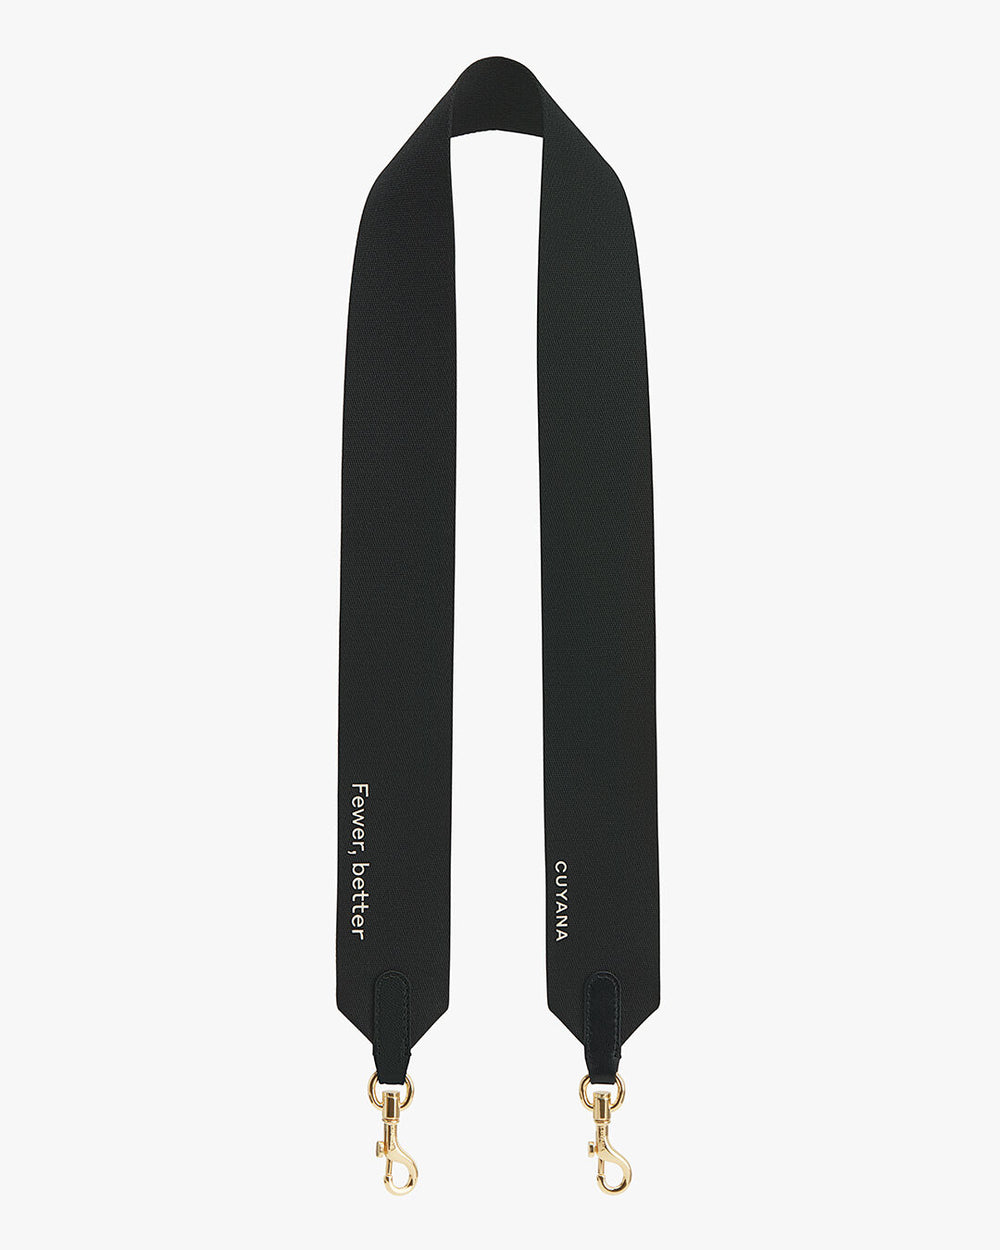 Camera strap with metal clasps and branded text.